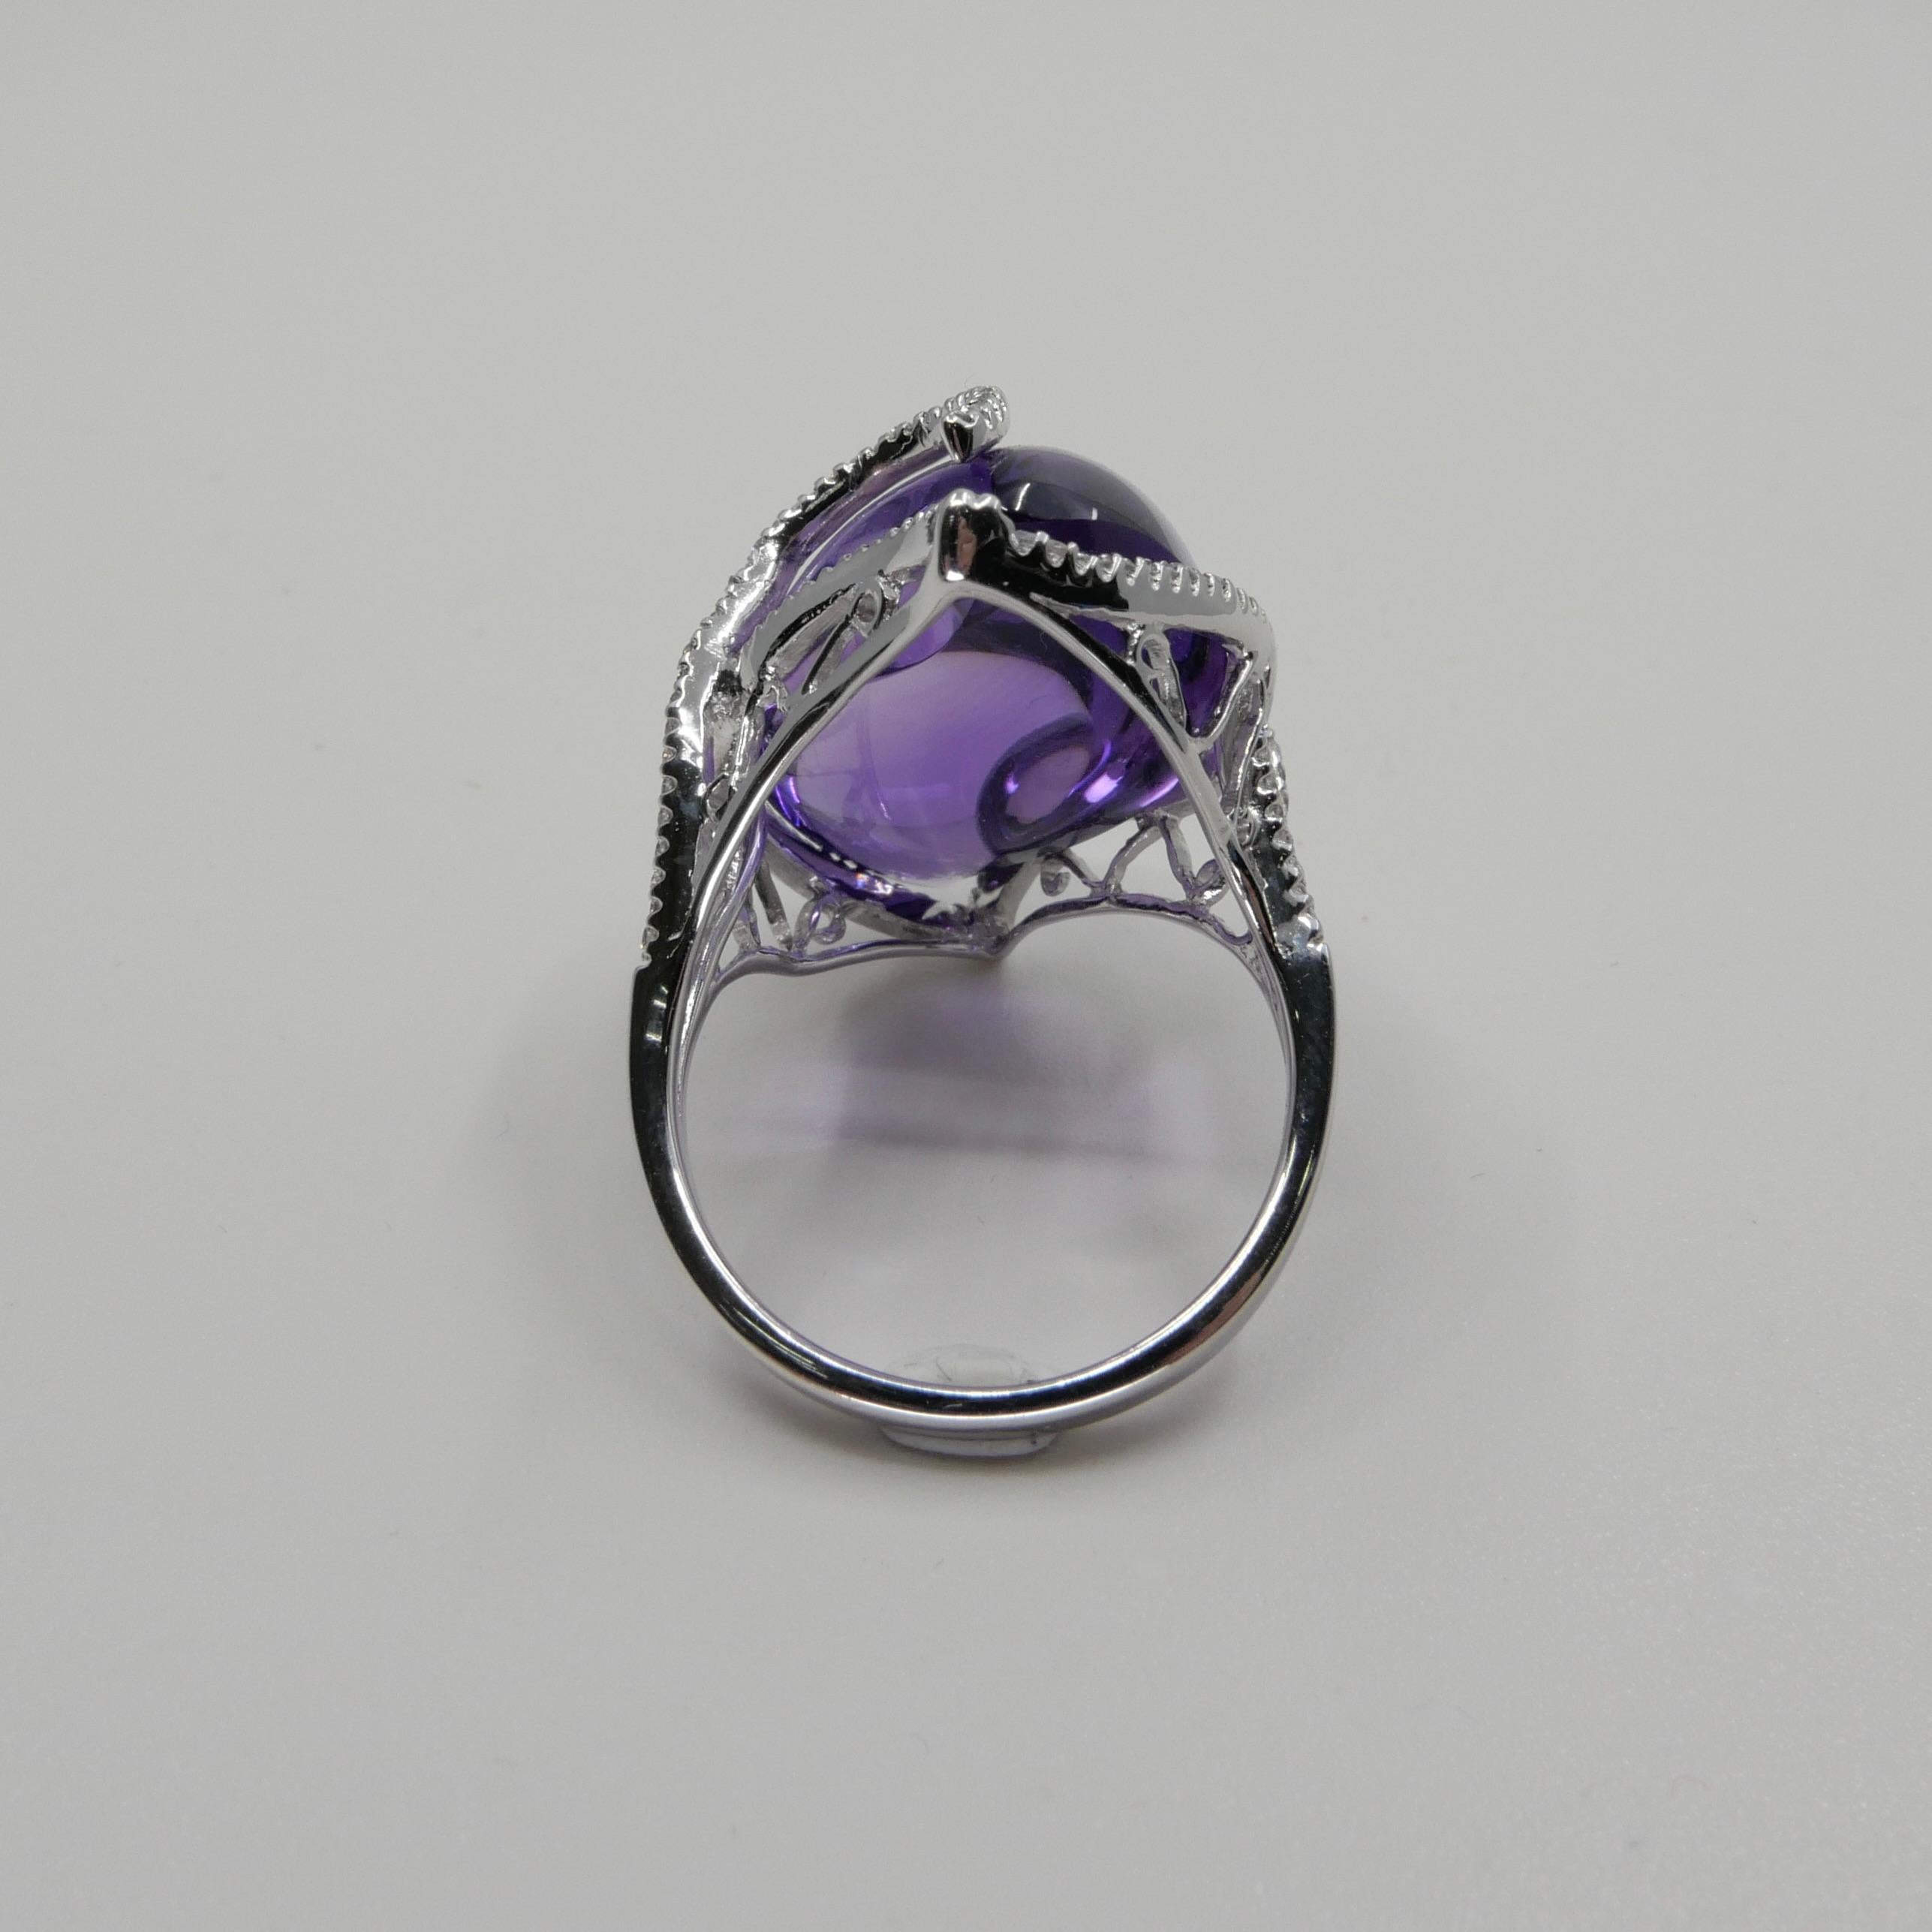 23 Carat Amethyst & Diamond Cocktail Ring. Large Contemporary Statement Ring.    For Sale 9